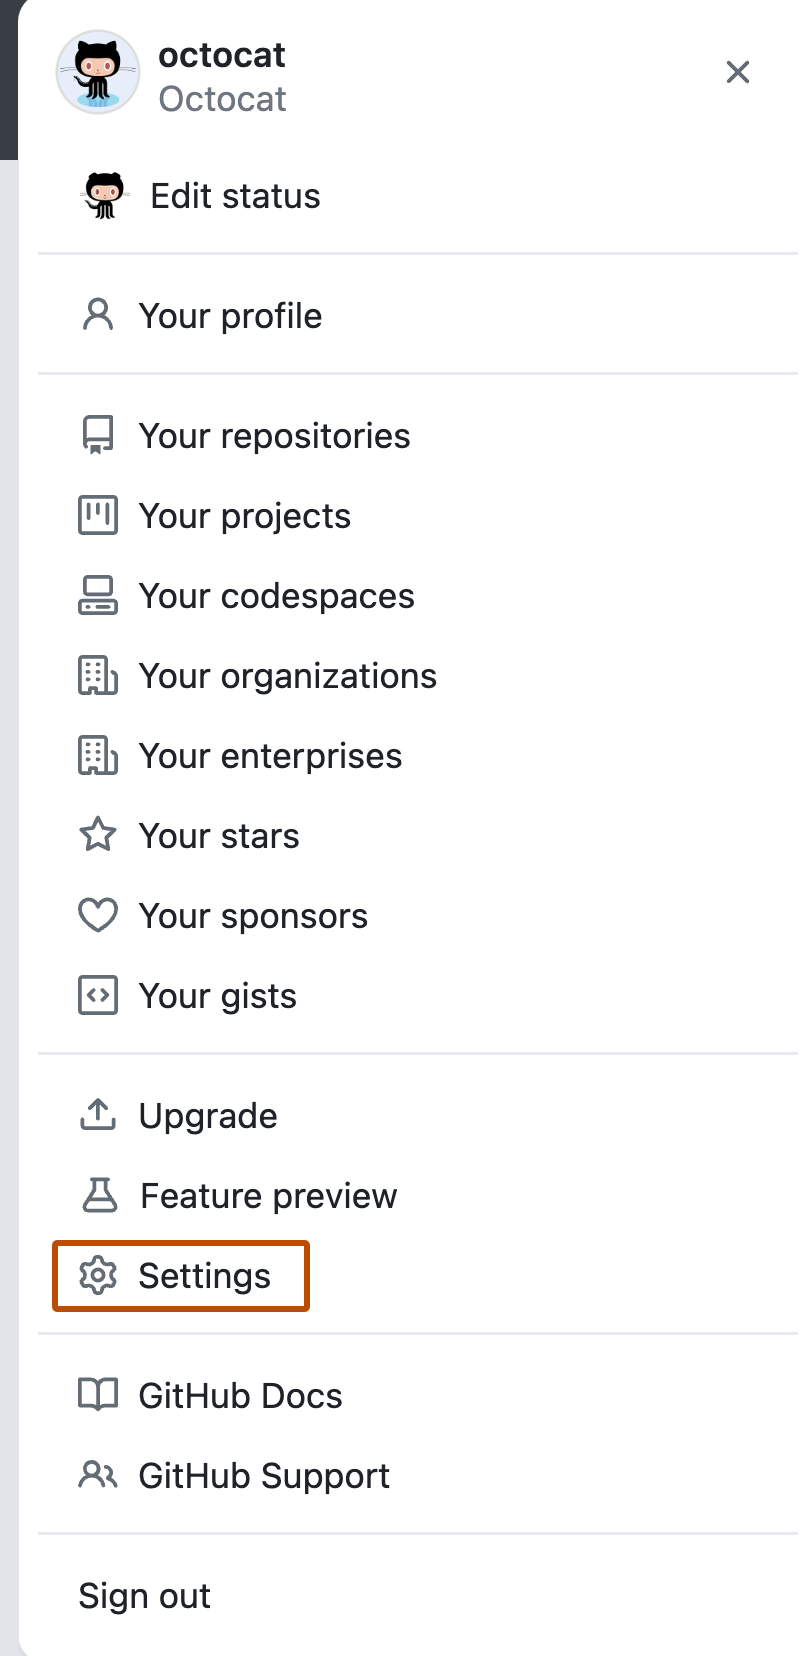 Screenshot of GitHub's account menu showing options for users to view and edit their profile, content, and settings. The menu item "Settings" is outlined in dark orange.